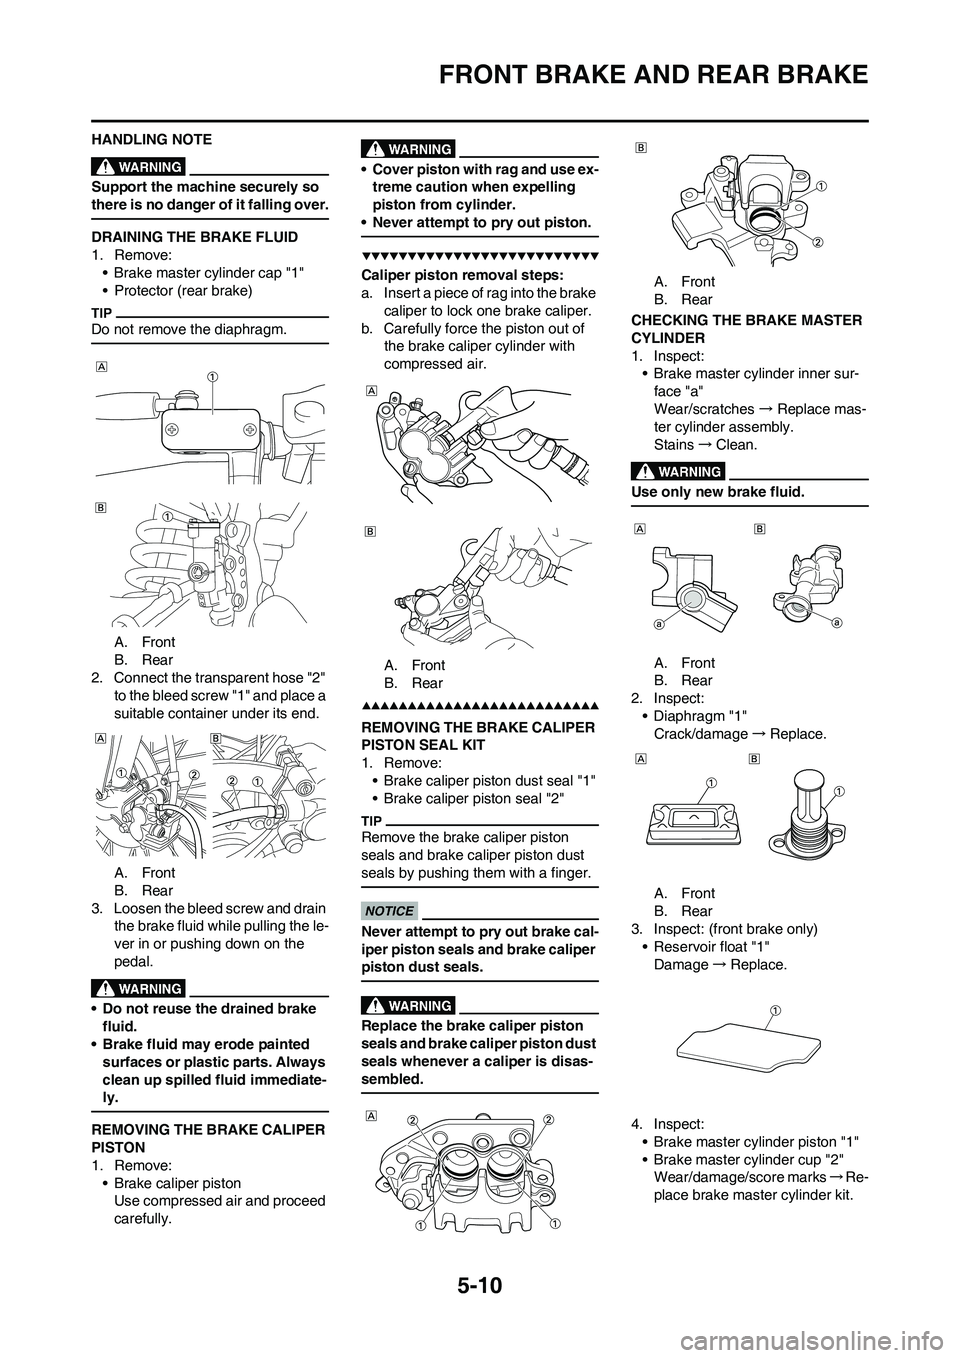 YAMAHA YZ450F 2009  Owners Manual 5-10
FRONT BRAKE AND REAR BRAKE
HANDLING NOTE
Support the machine securely so 
there is no danger of it falling over.
DRAINING THE BRAKE FLUID
1. Remove:
• Brake master cylinder cap "1"
• Protecto